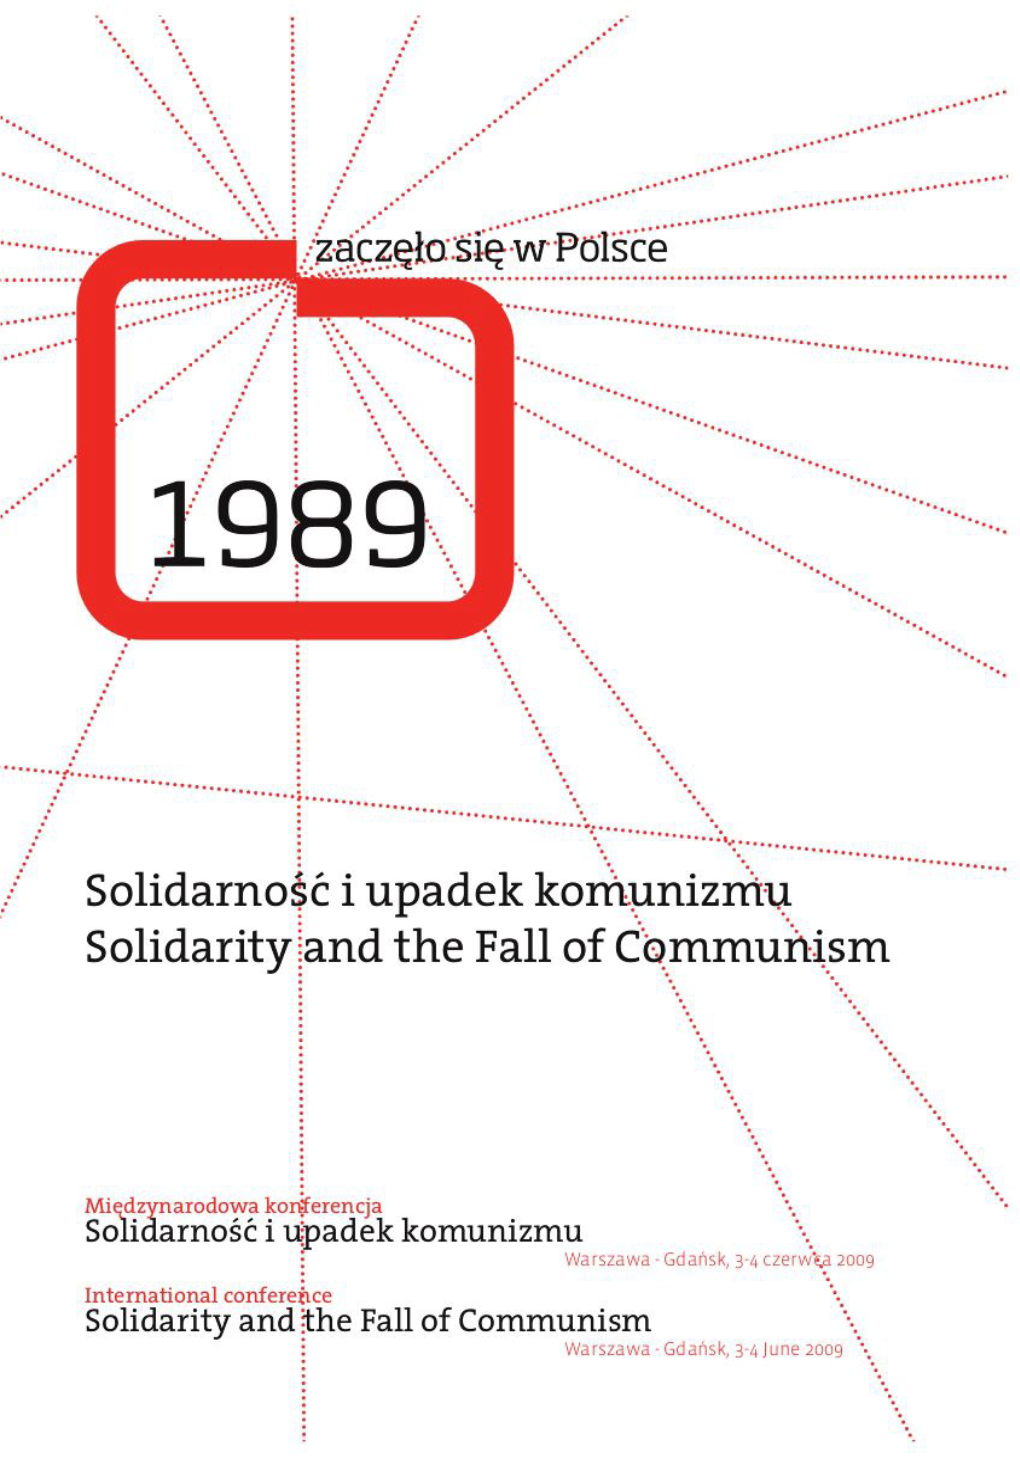 Solidarity and the Fall of Communism